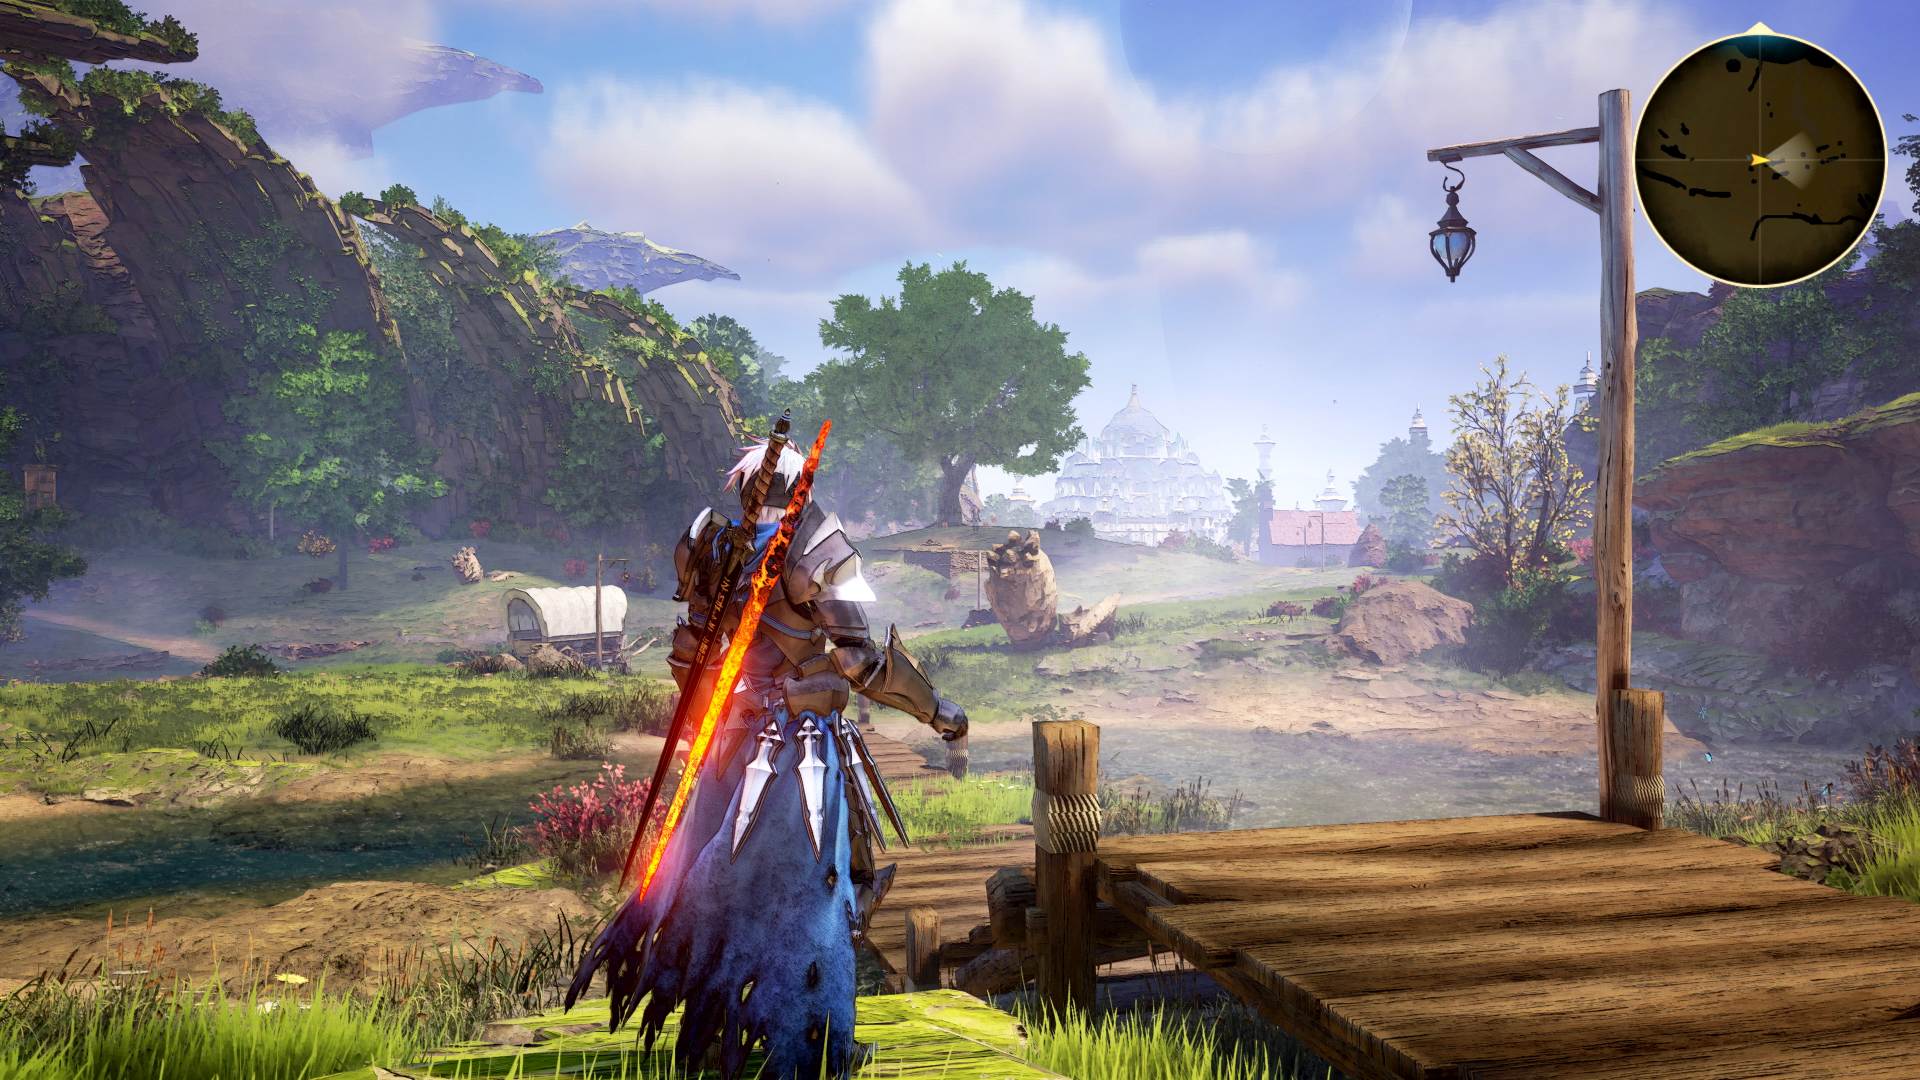 Tales Of Arise Game Wallpapers